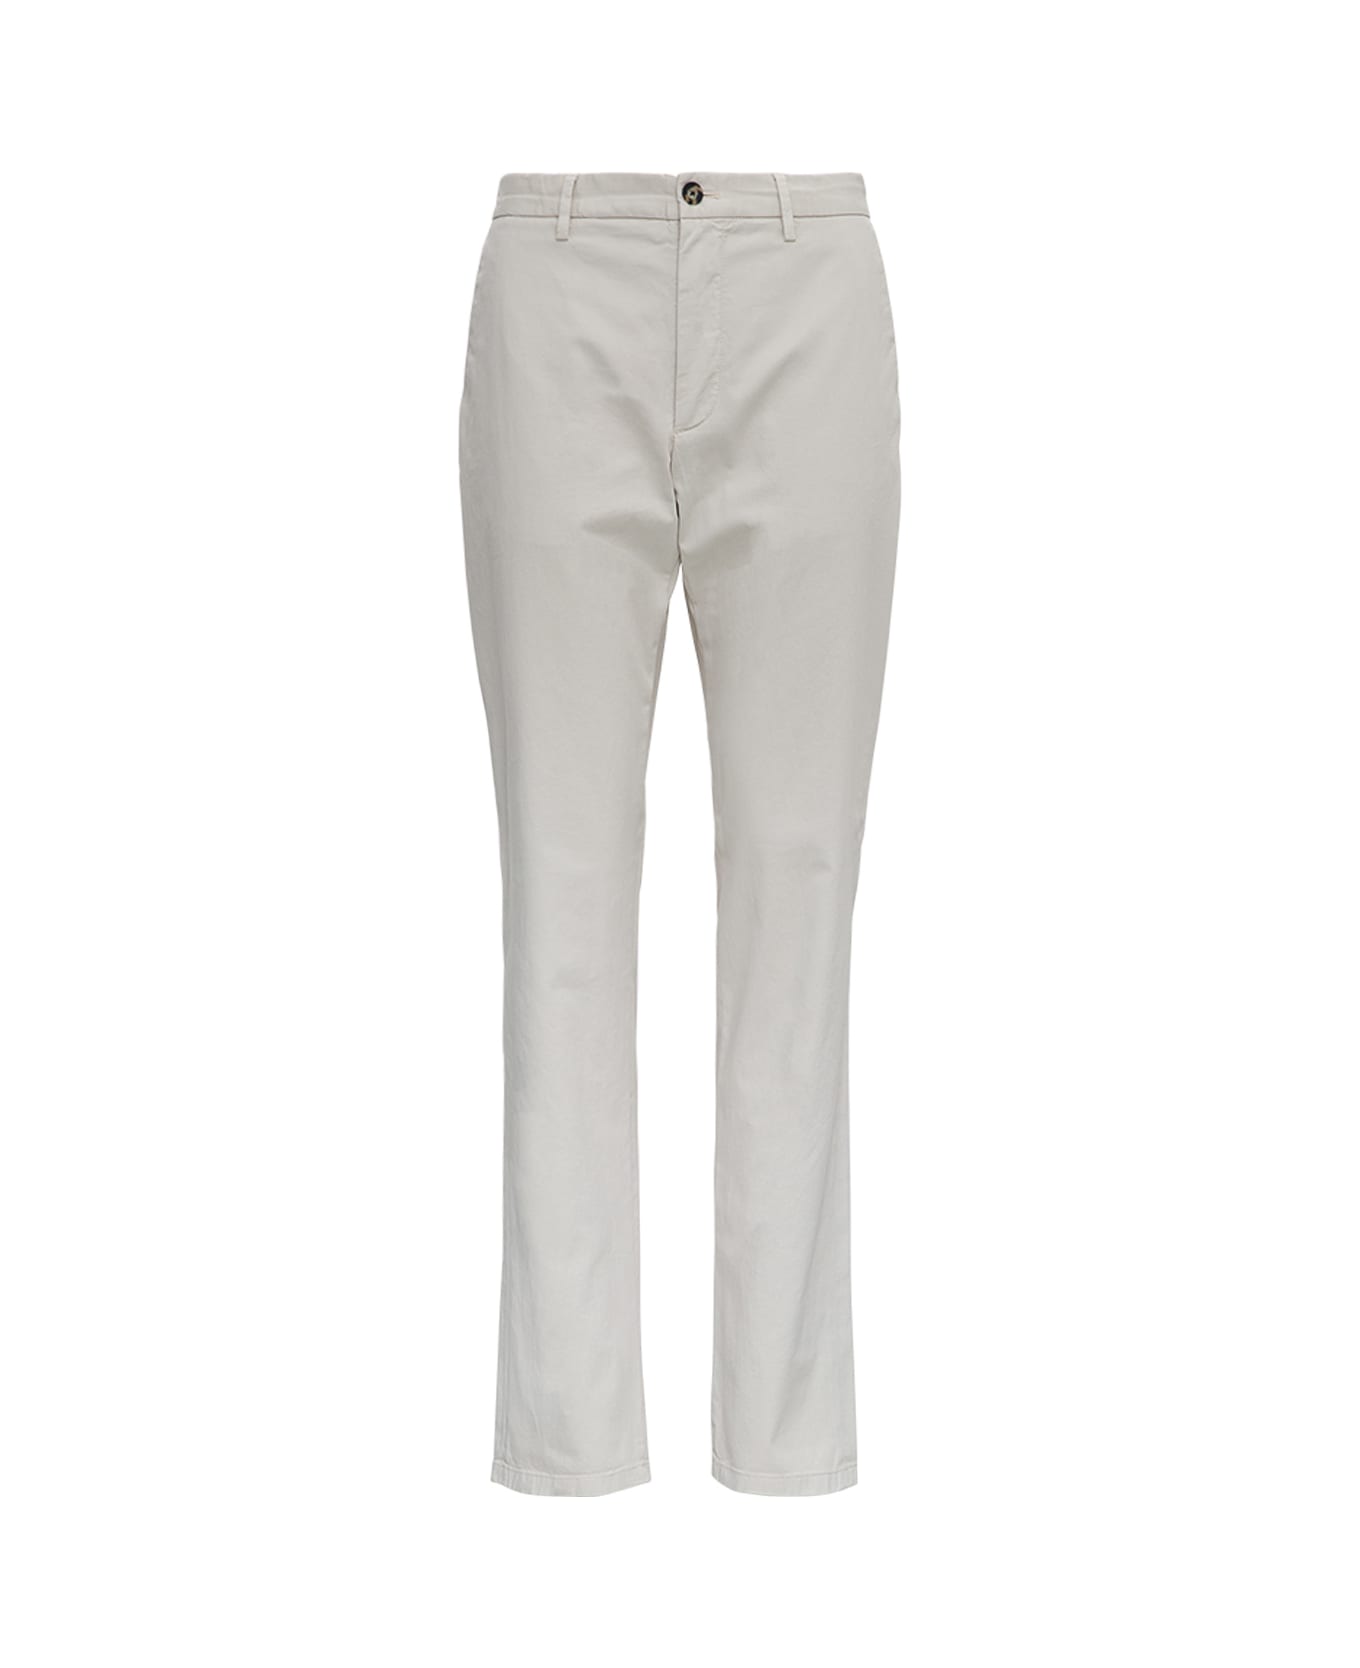 Z Zegna Ivory-colored Cotton Tailored Trousers - White